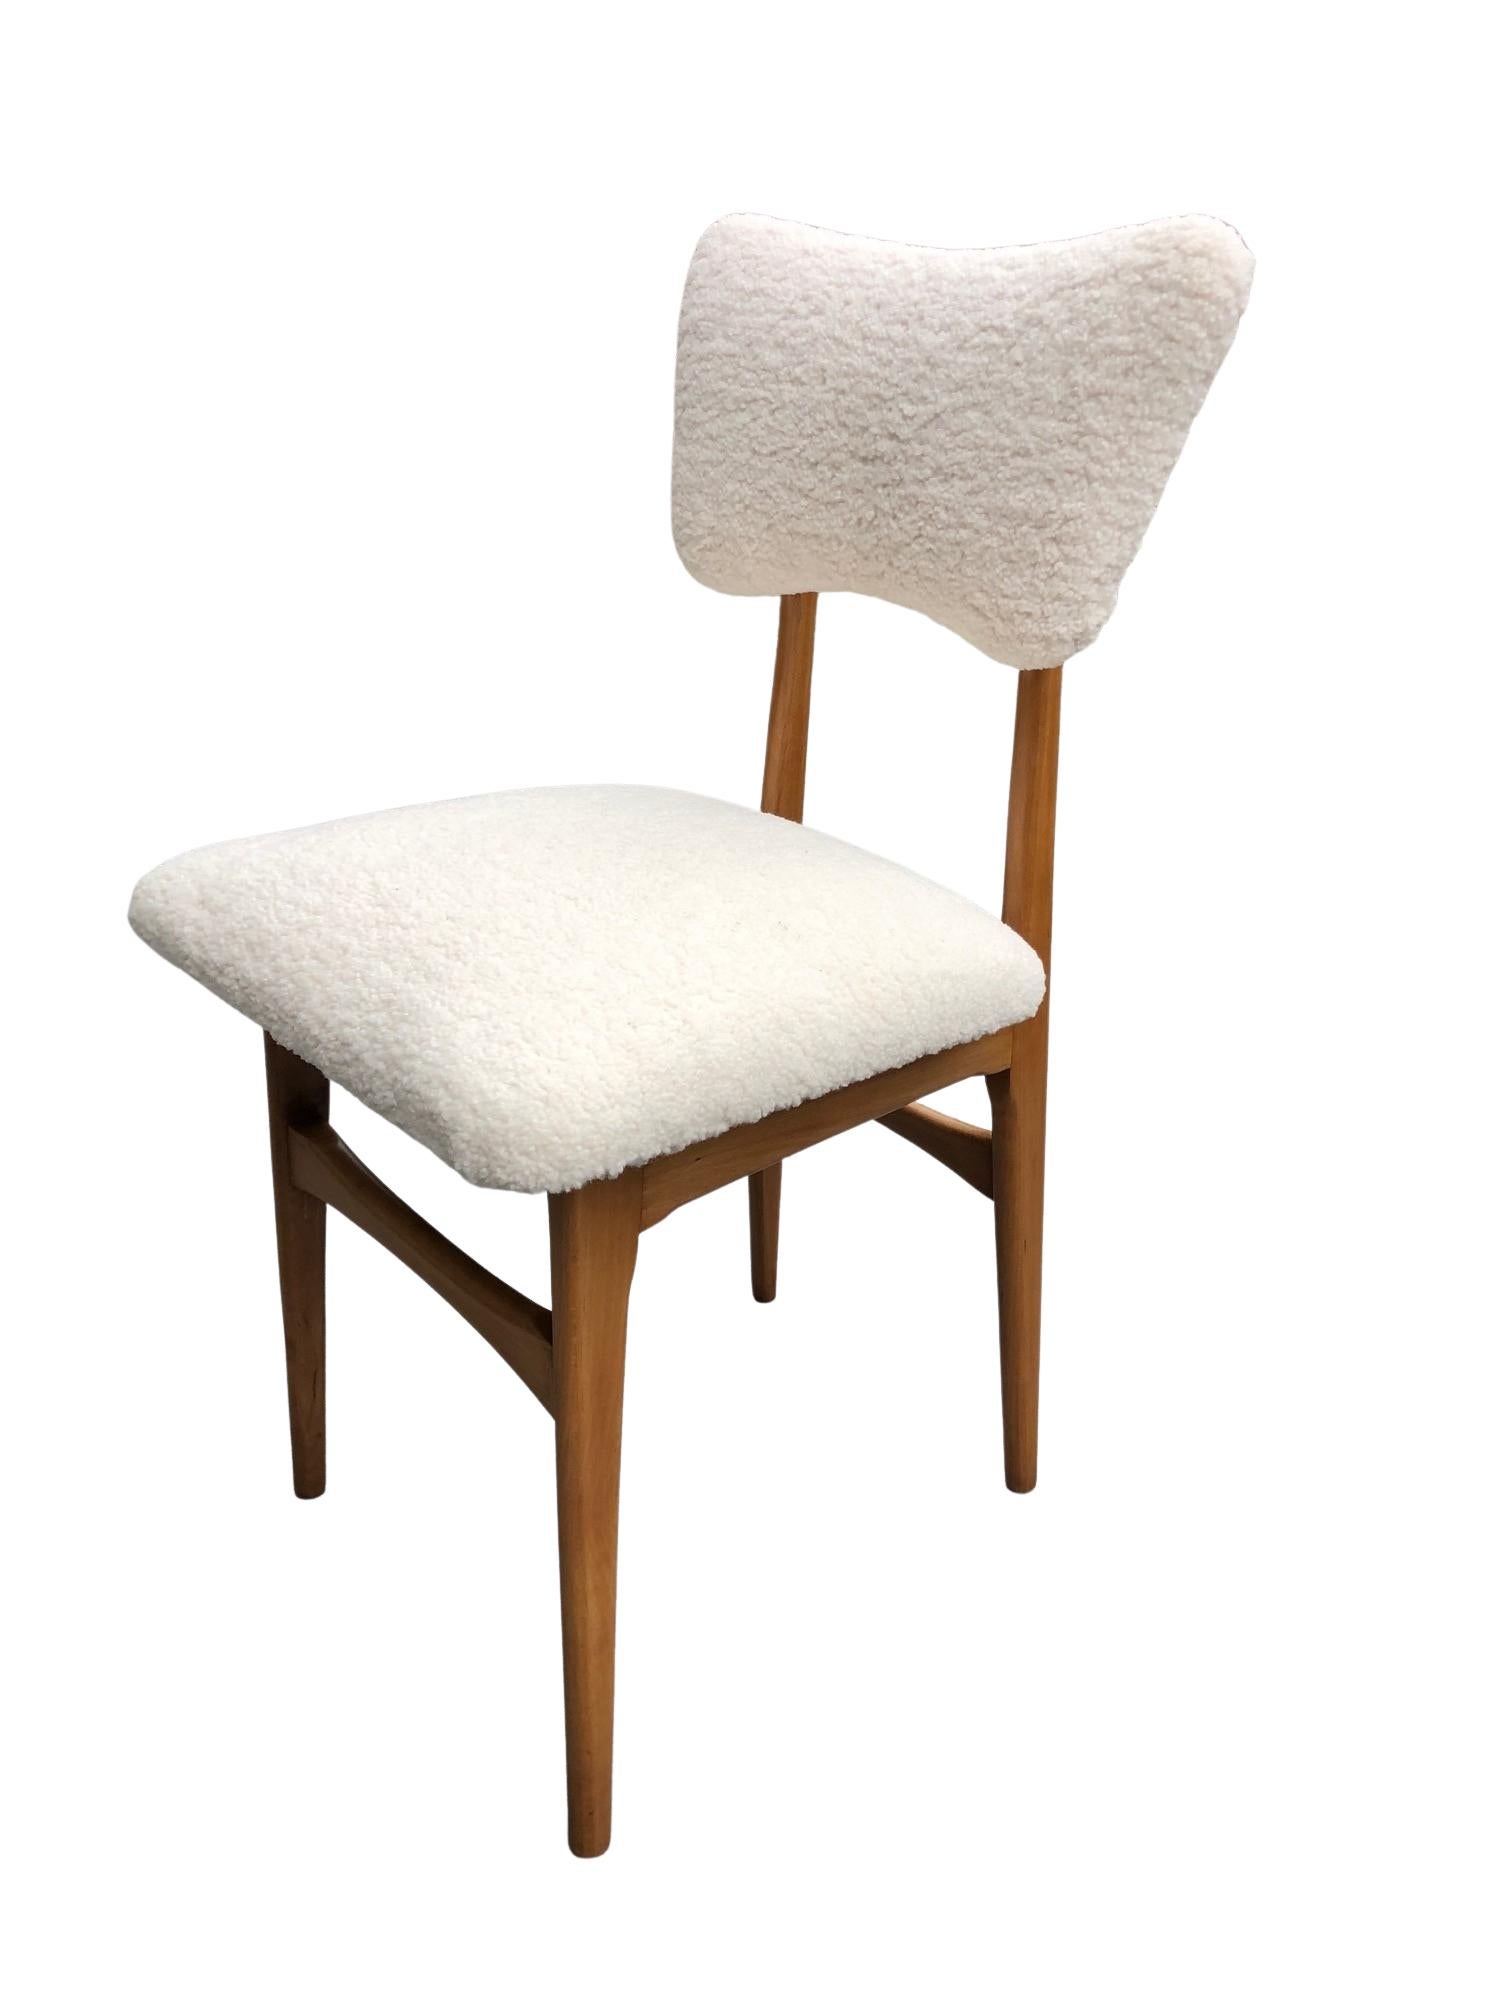 Polish Midcentury Cream Bouclé and Wood Dining Chair, Europe, 1960s For Sale